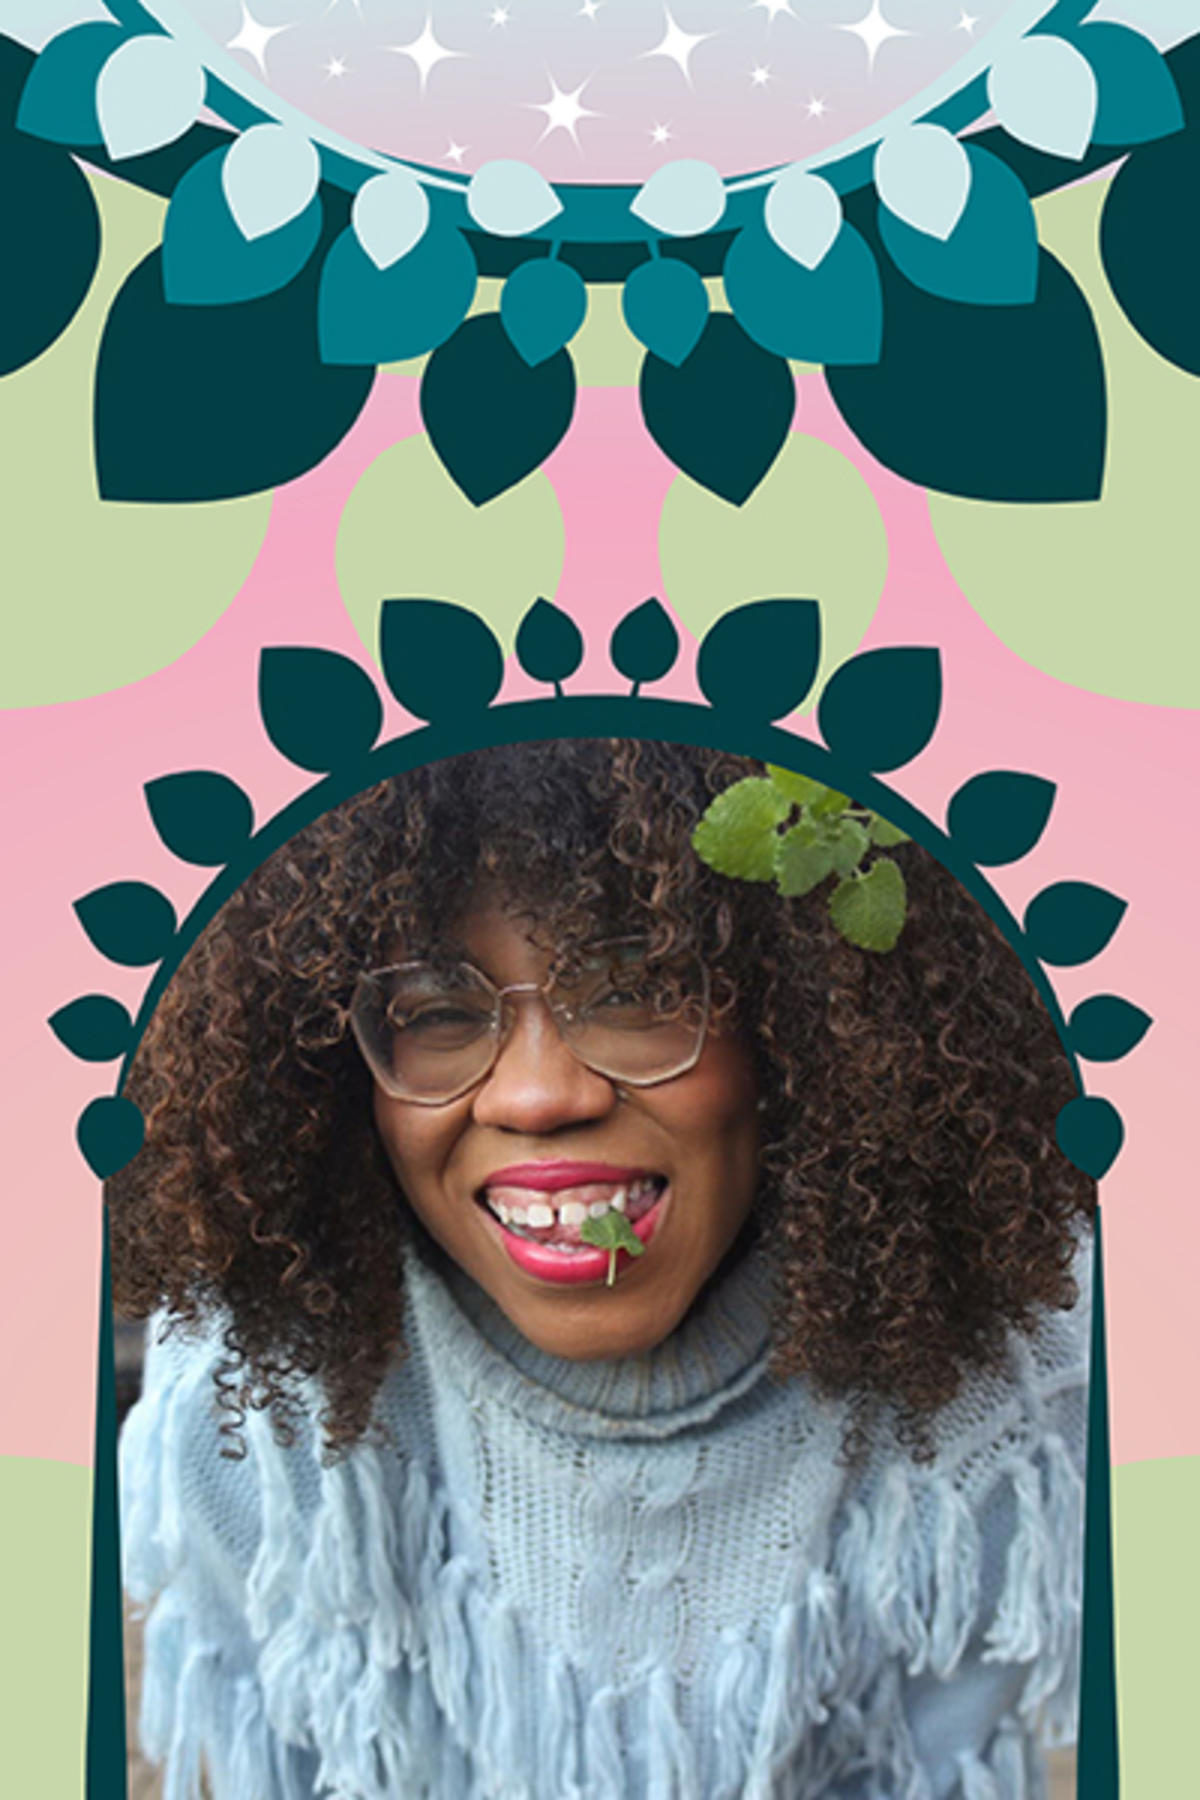 Alexis Nikole Nelson color portrait. Alexis aka Black Forager is a Black woman with shades of lighter brown in her dark brown curly hair. She is wearing large glasses, pinkish red lipstick on, and a blue knit sweater. She also has what looks like mint in her hair and is biting a bit of a green plant between her teeth as she smiles. Surrounding her is colorful illustrations of flowers, and in her portrait she is framed with petals in dark green (peacock)